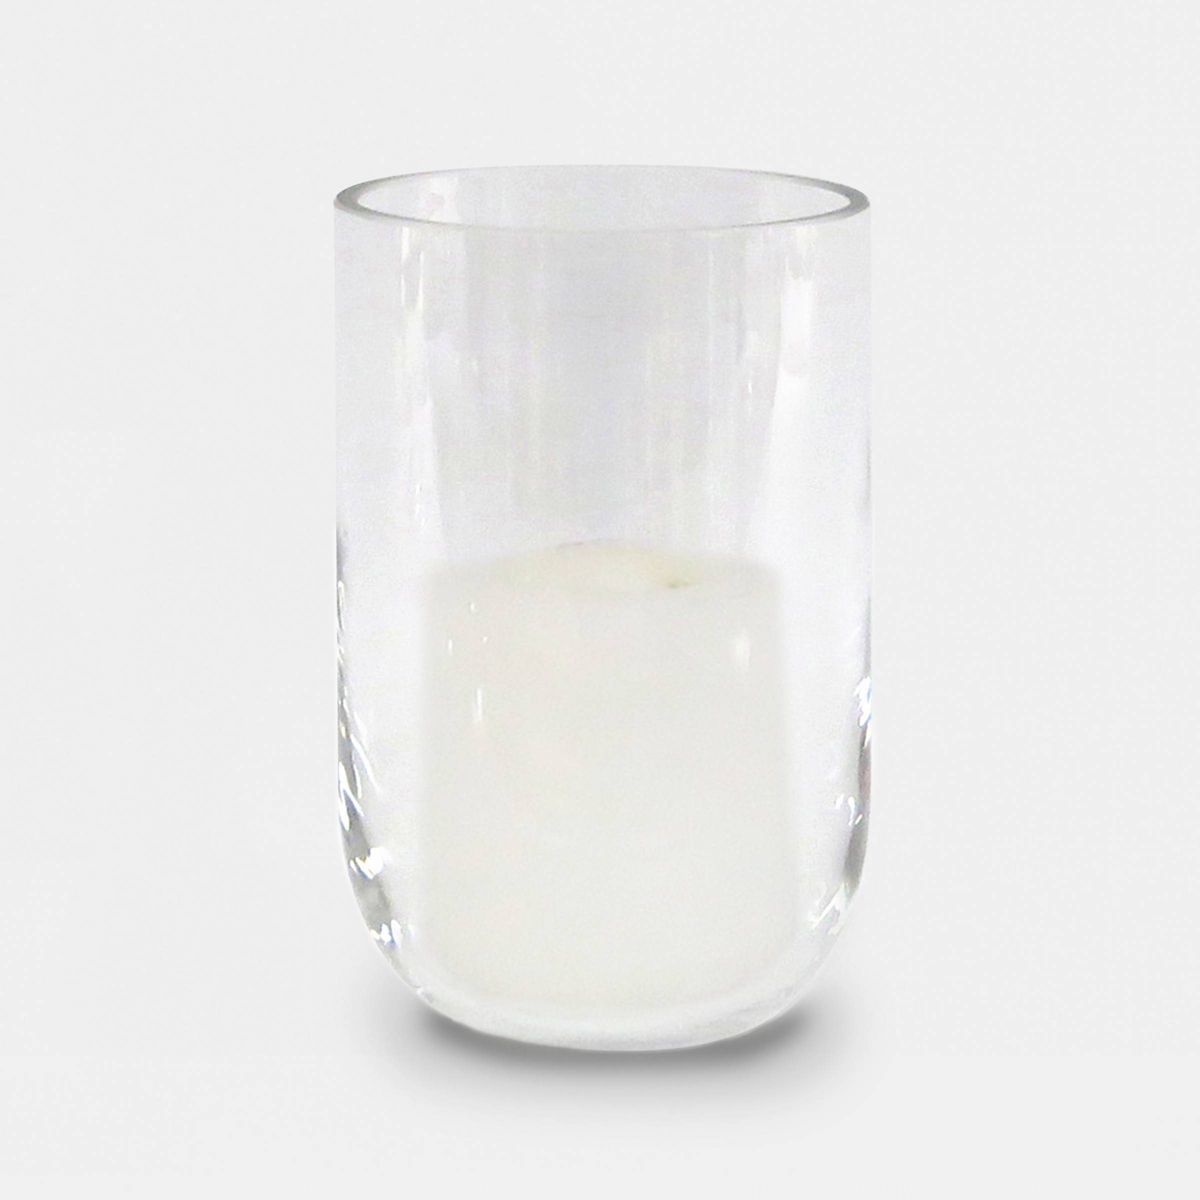 10" x 5.3" Hurricane Glass Pillar Candle Holder Clear - Made By Design